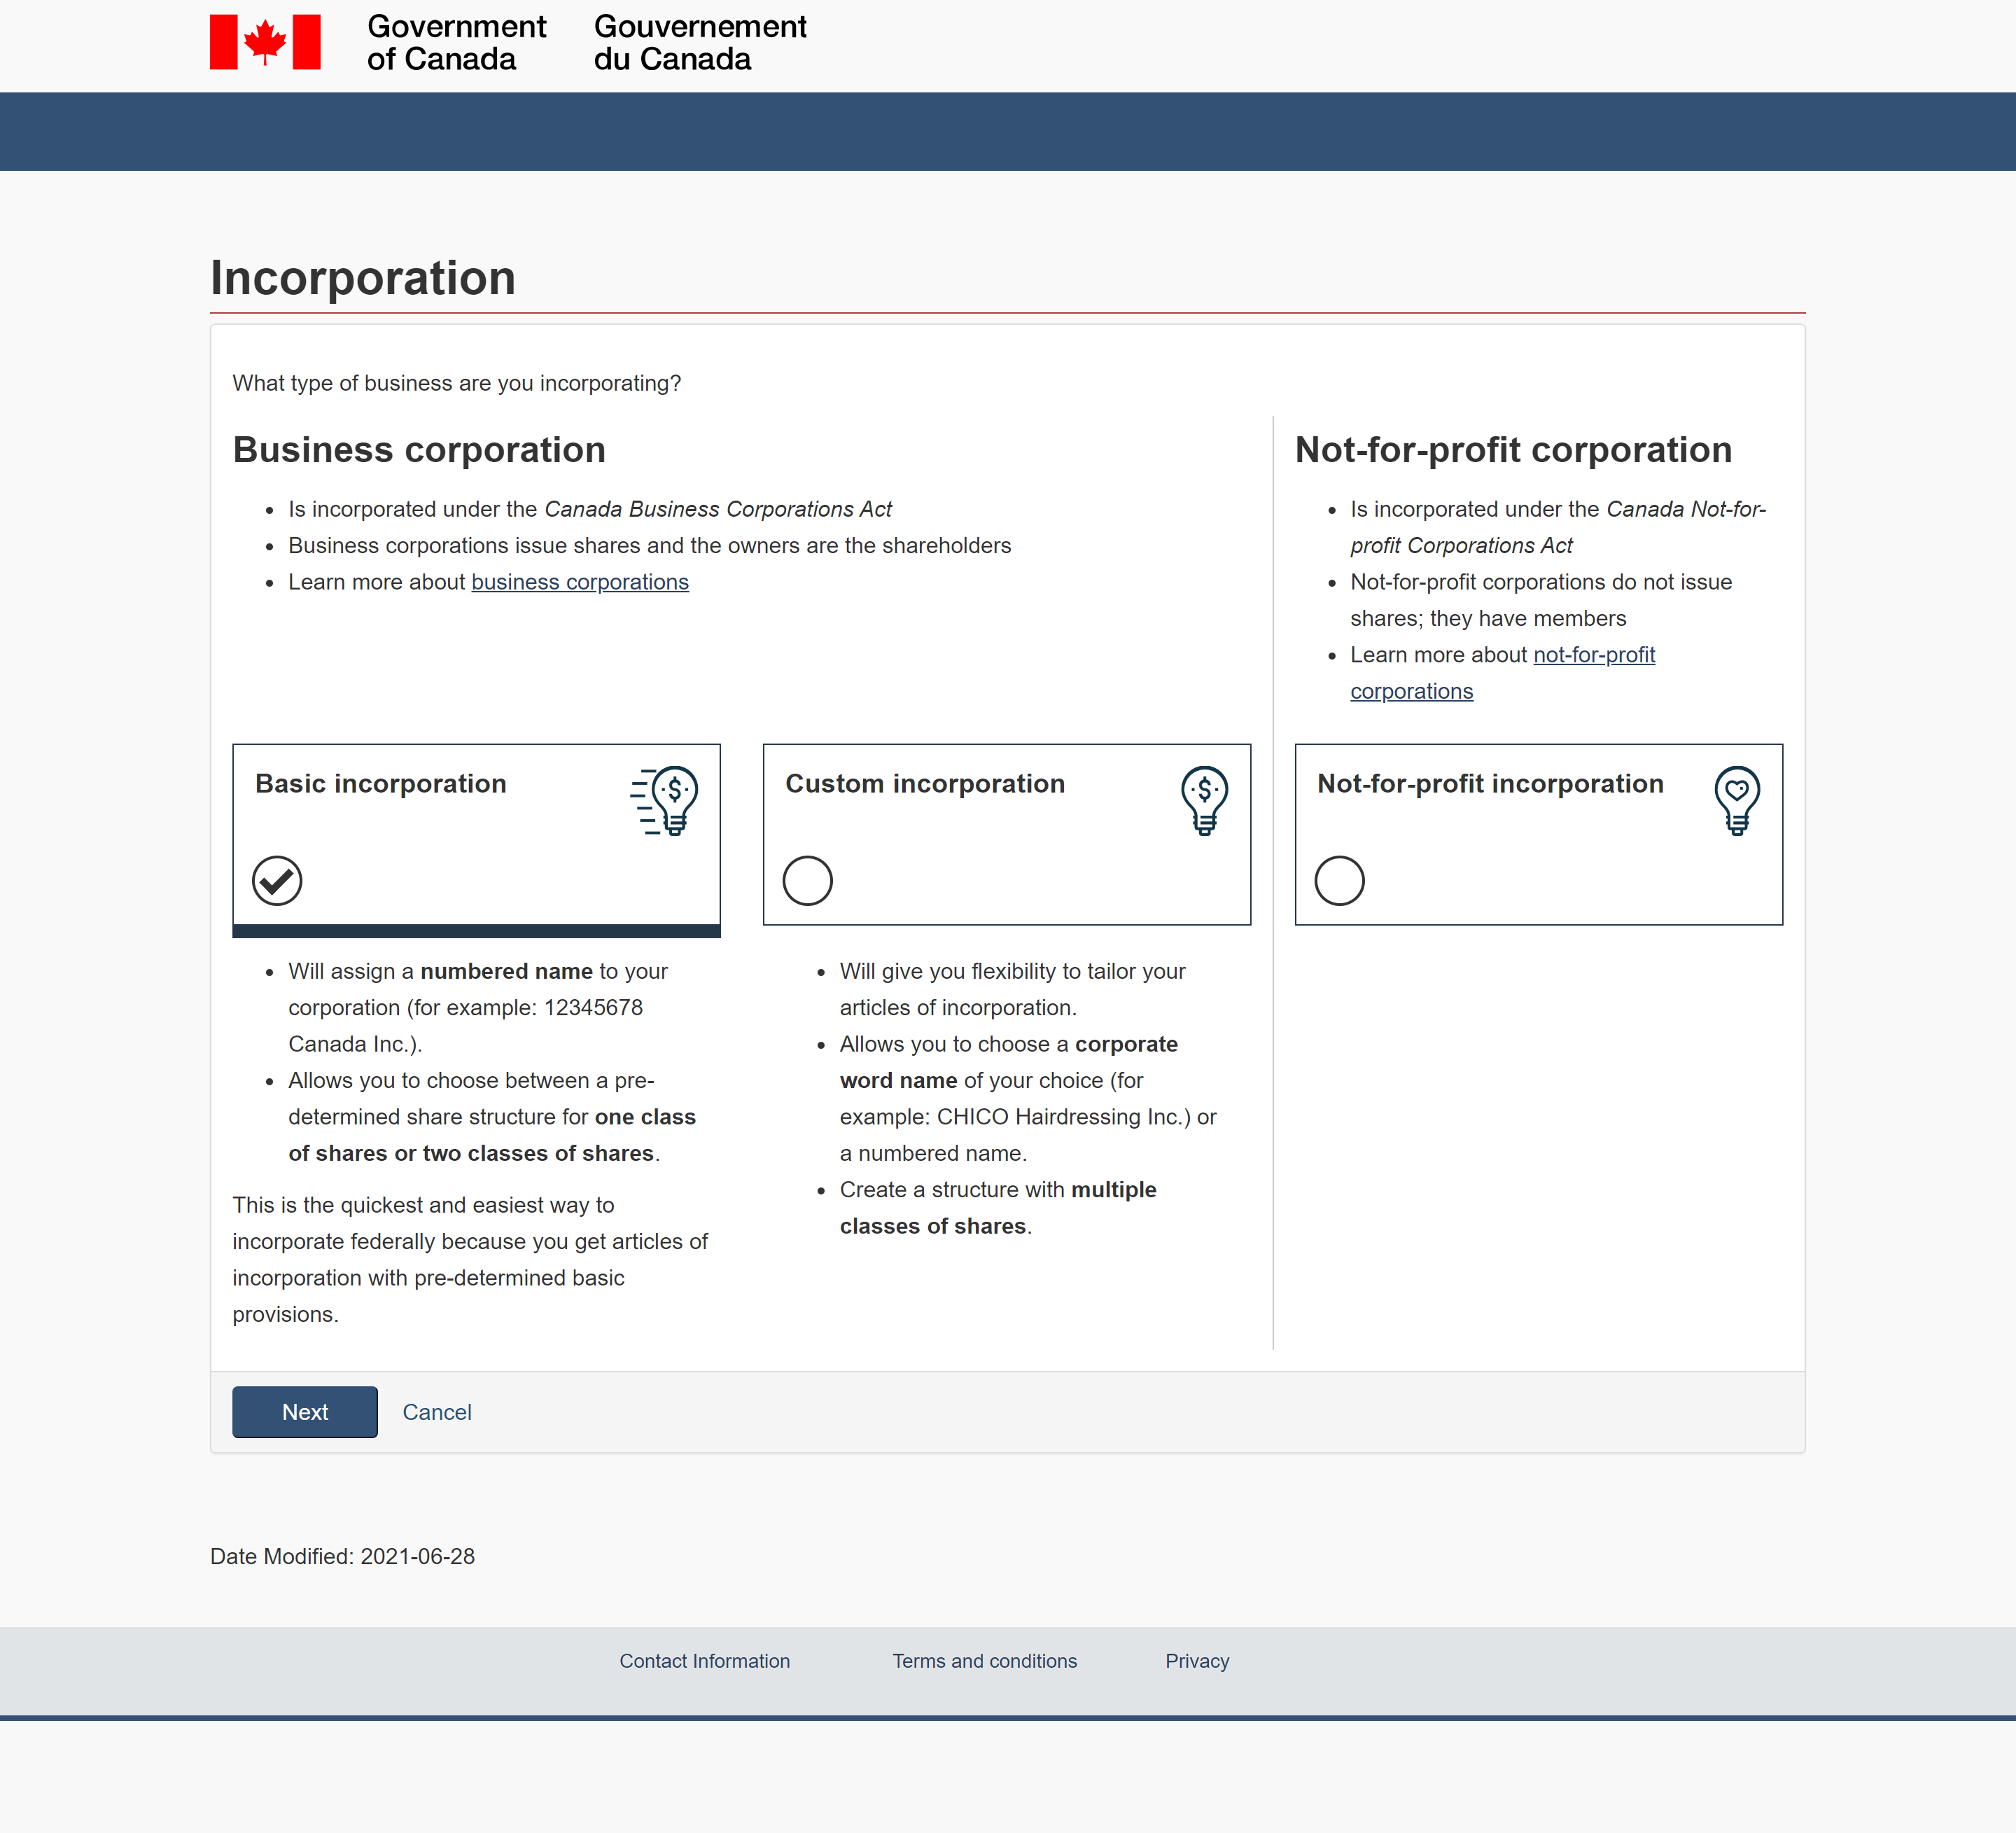 Screen where user chooses the Basic Incorporation option